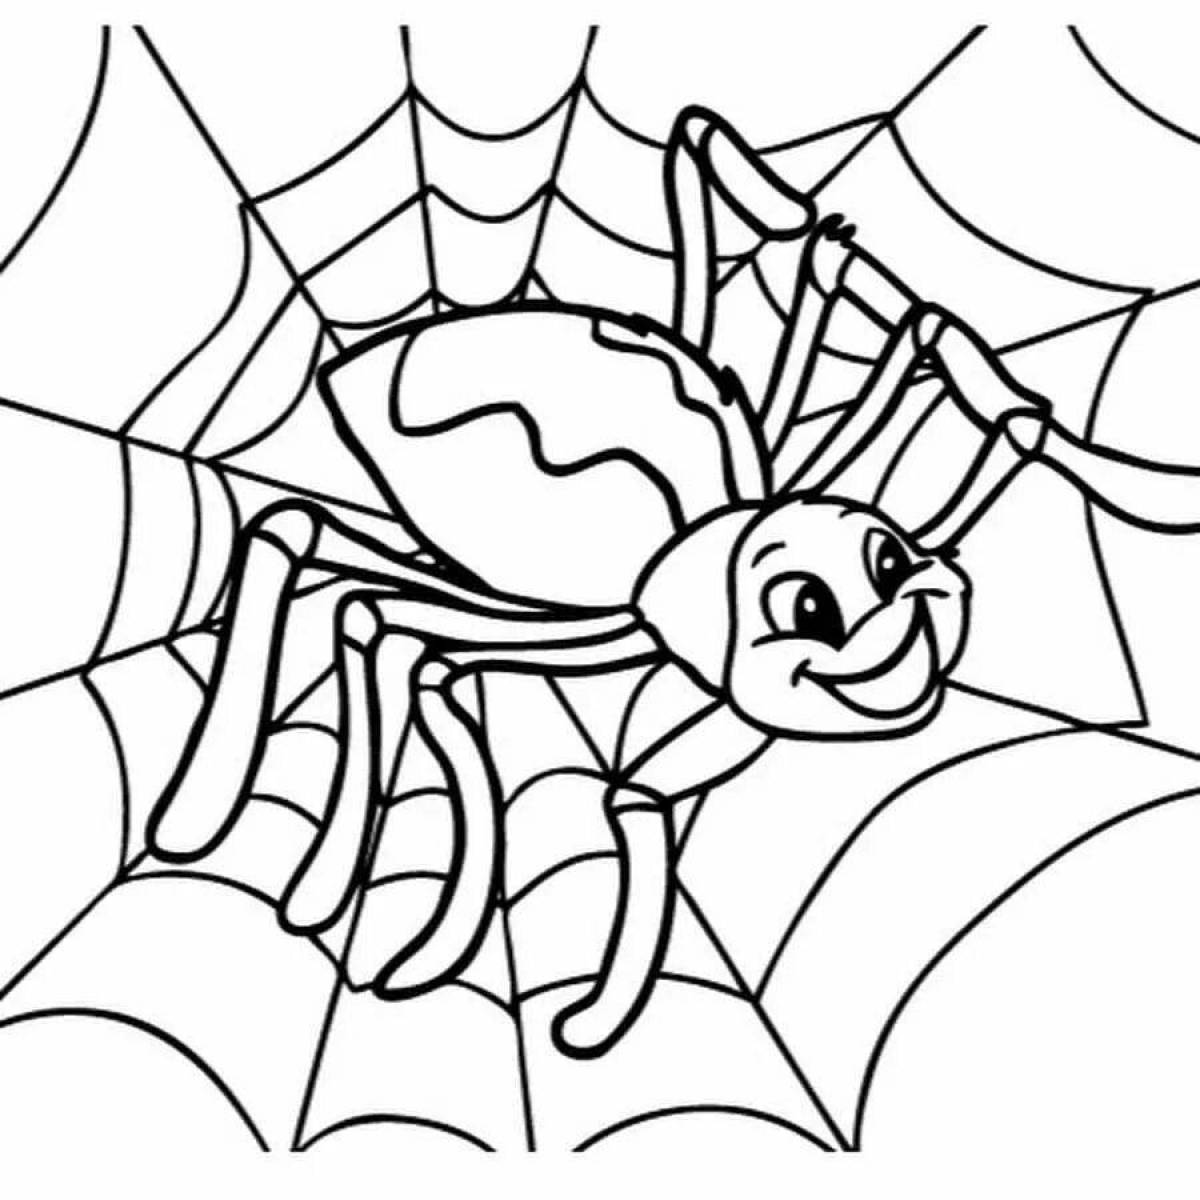 Adorable Spider Coloring Page for Toddlers